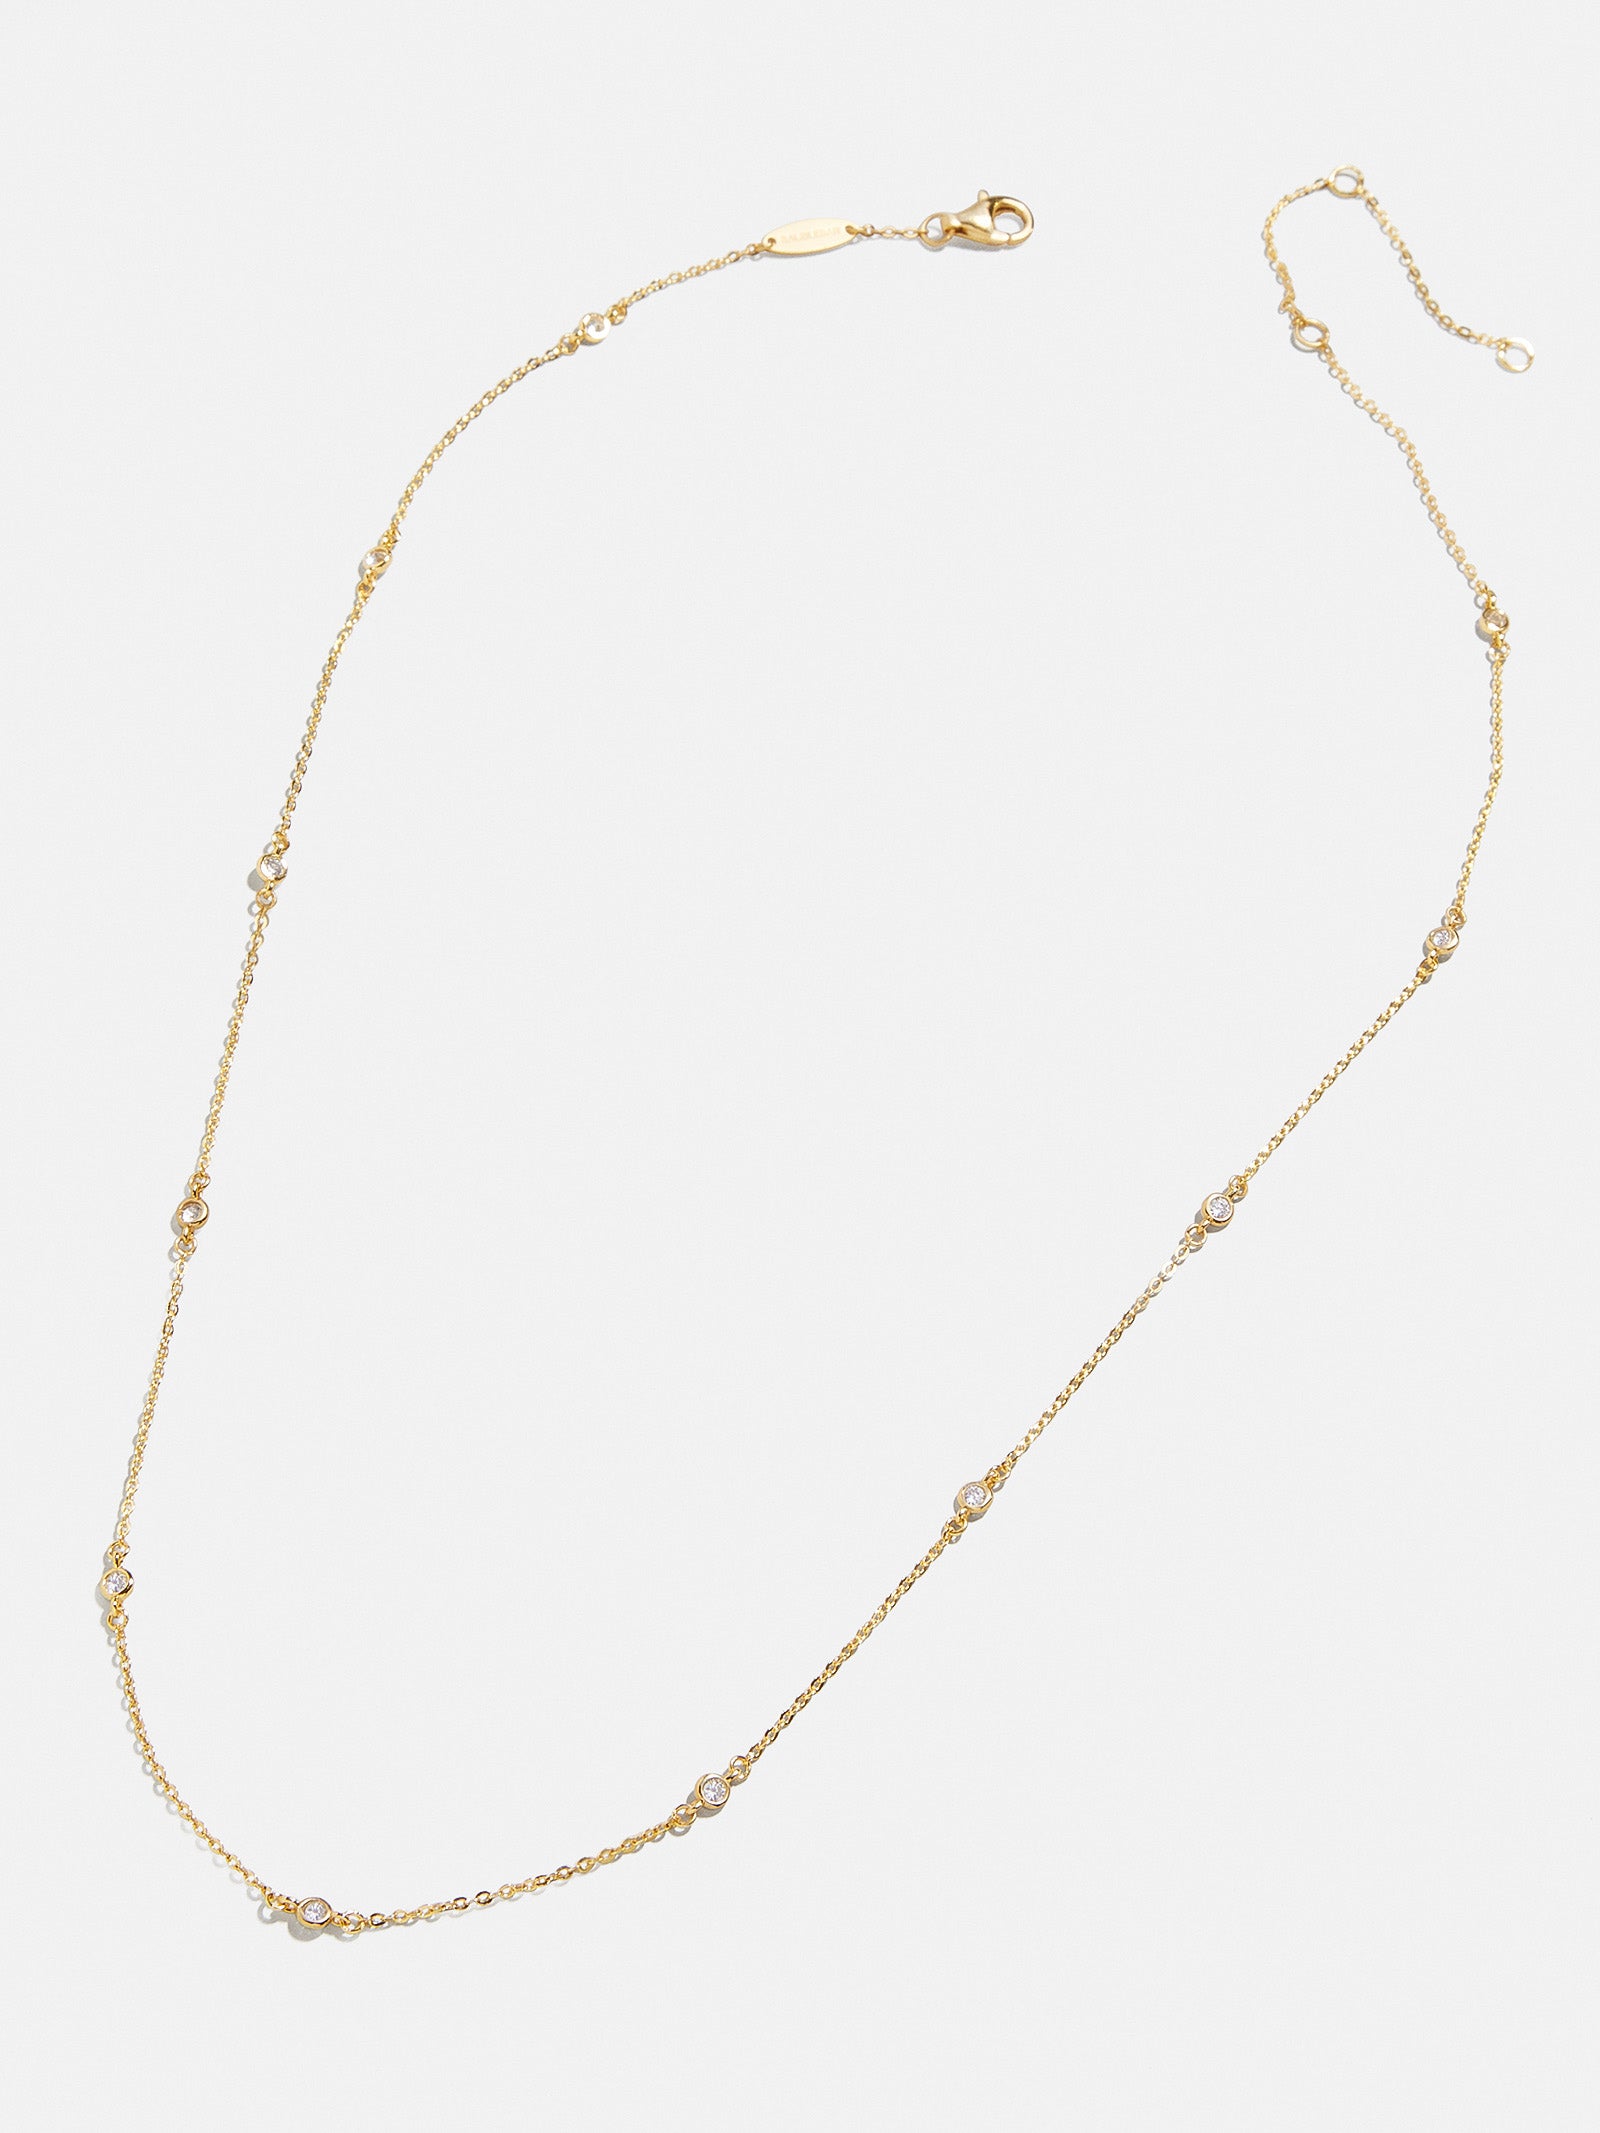 Yasmine 18K Gold Necklace - Clear/Gold – 18K Gold Plated Sterling ...